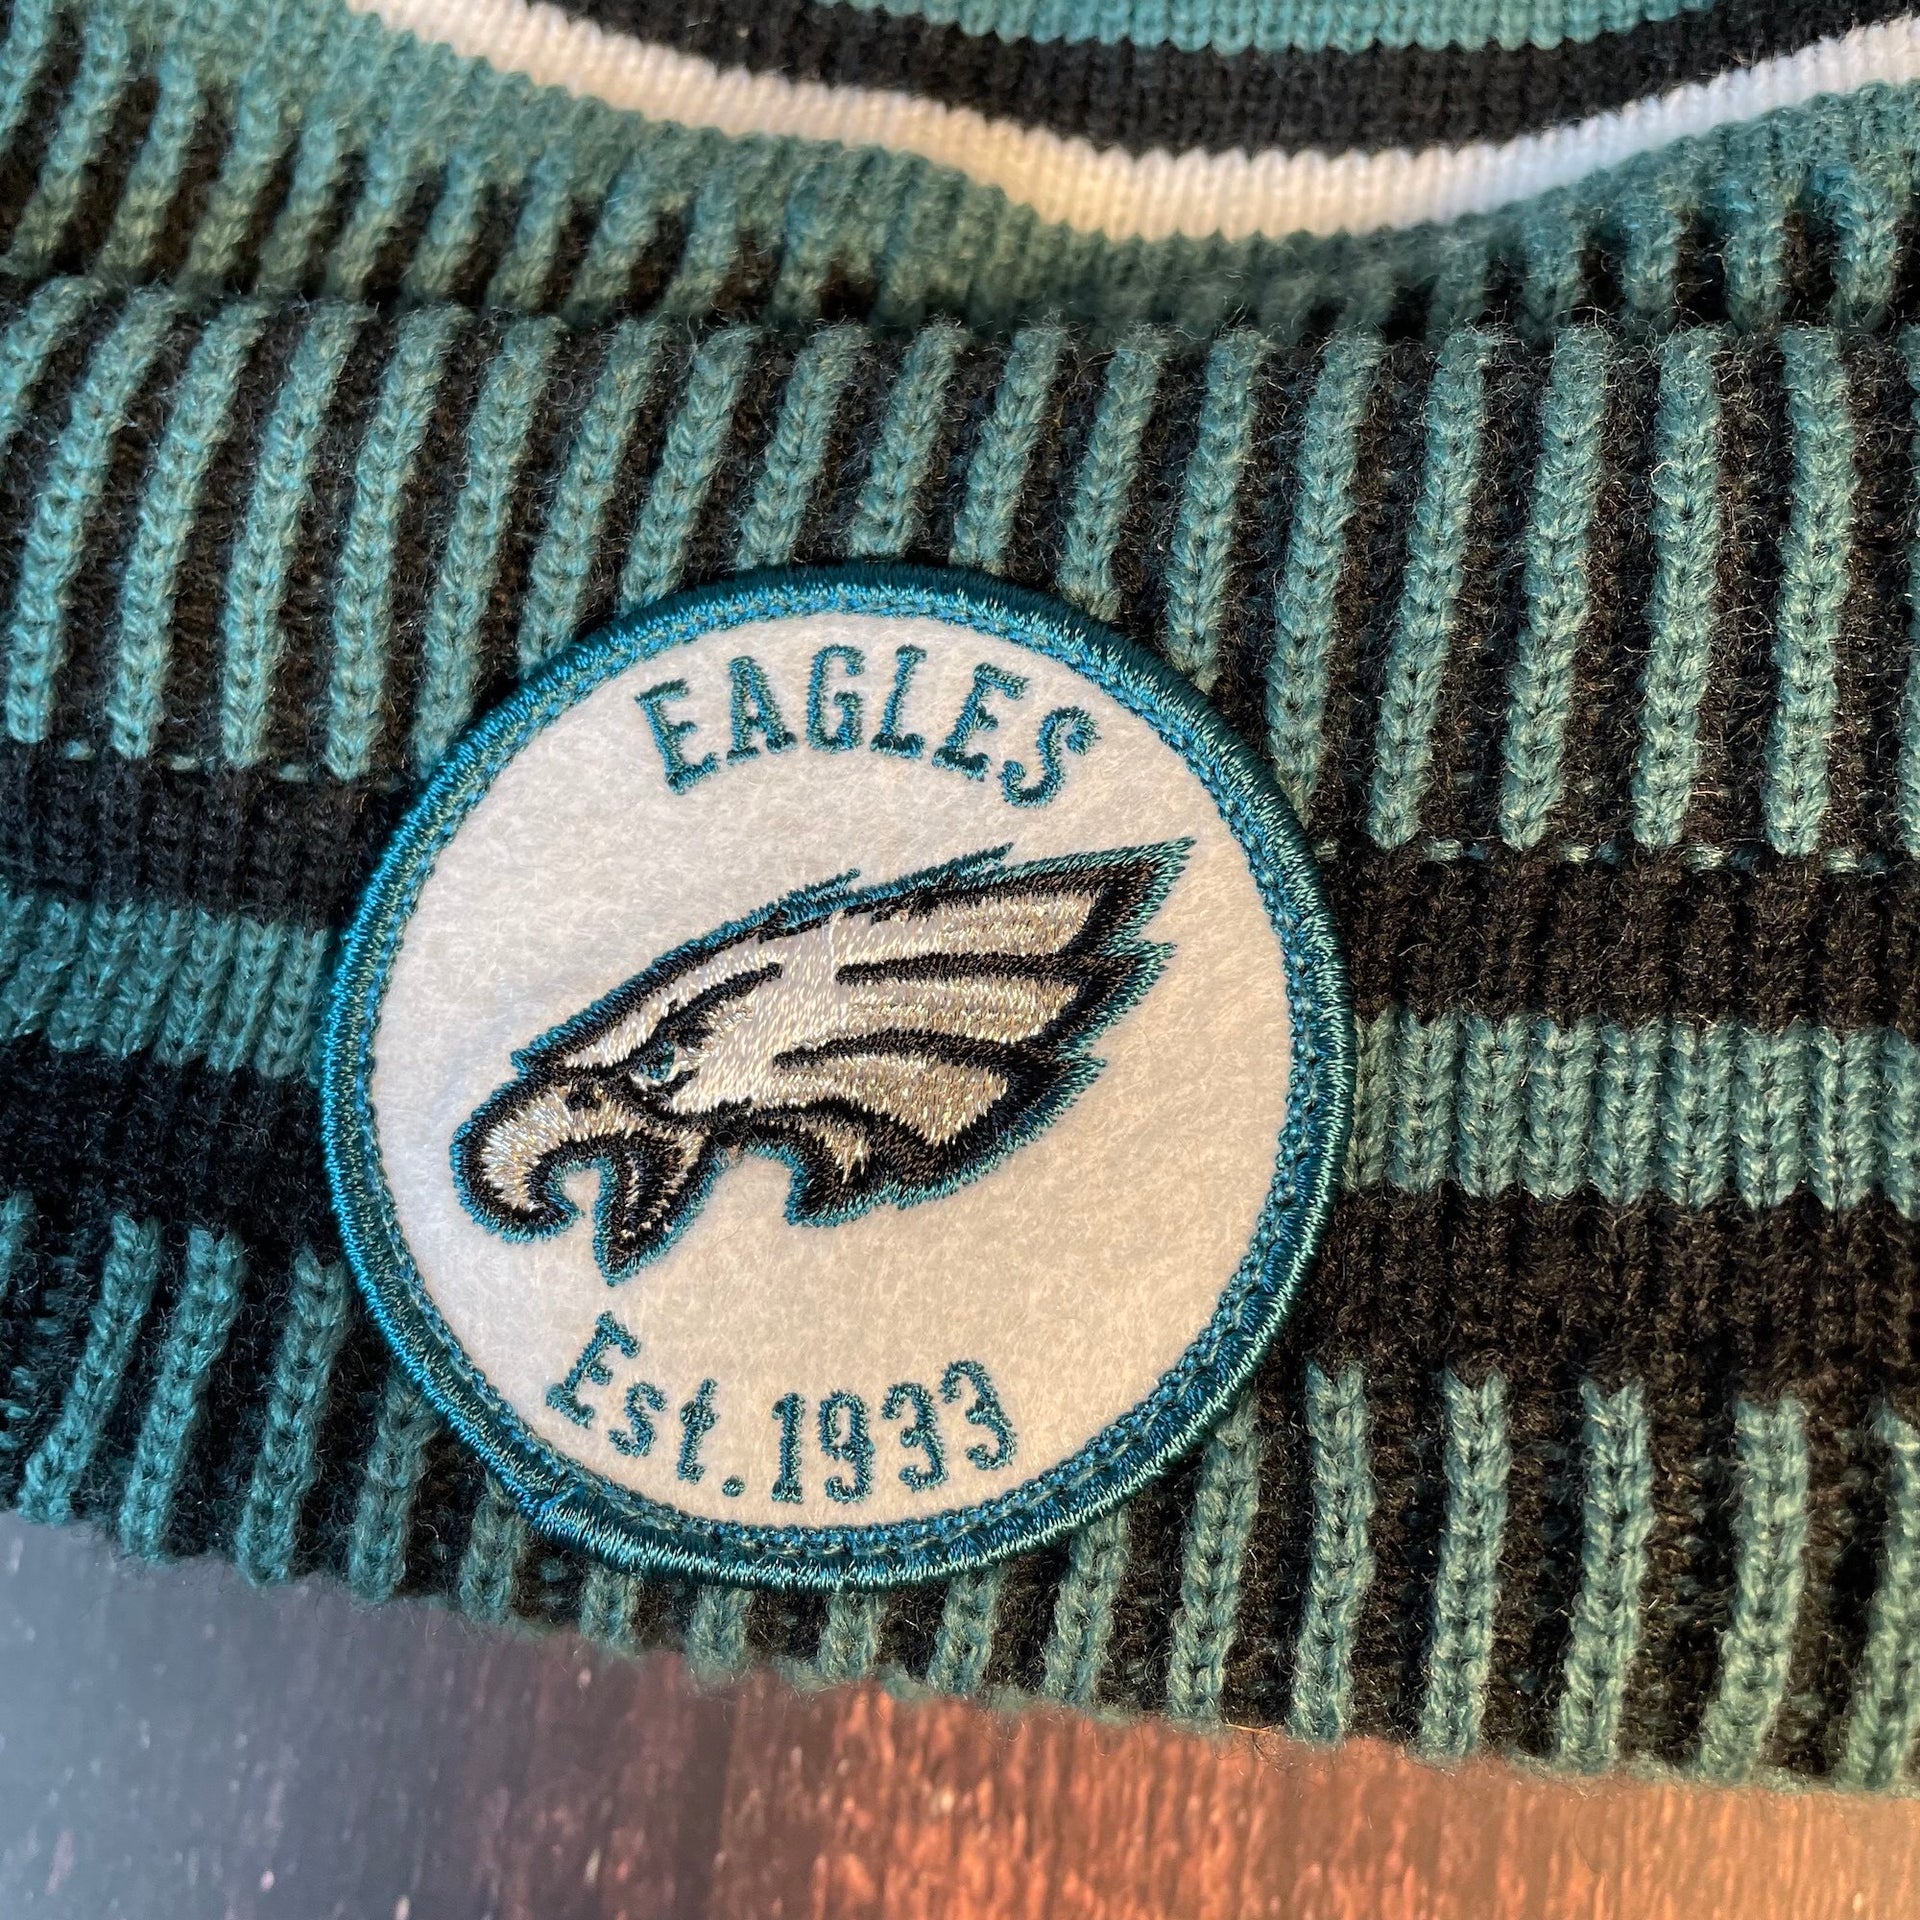 Close up on the Philadelphia Eagles On Field Eagles Colorway Striped Pom Pom Beanie front Eagles logo